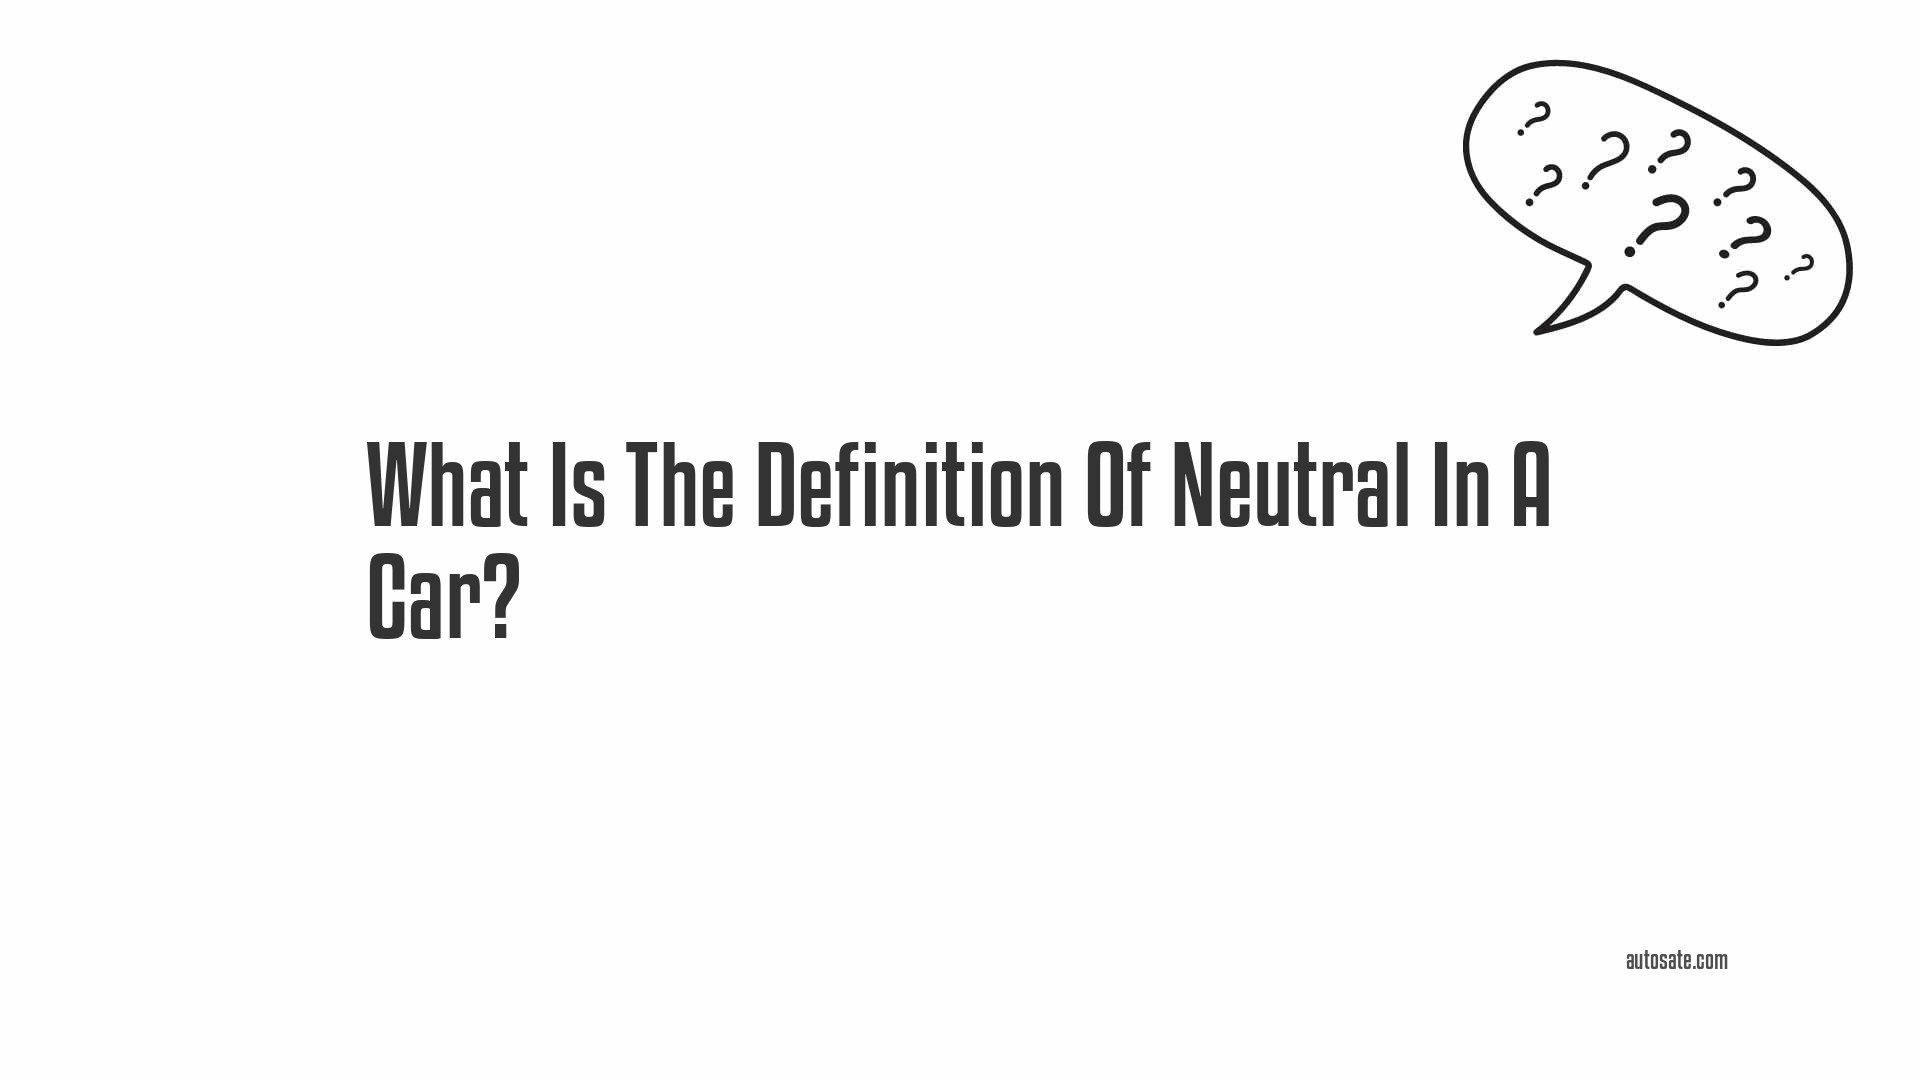 What Is The Definition Of Neutral In A Car?